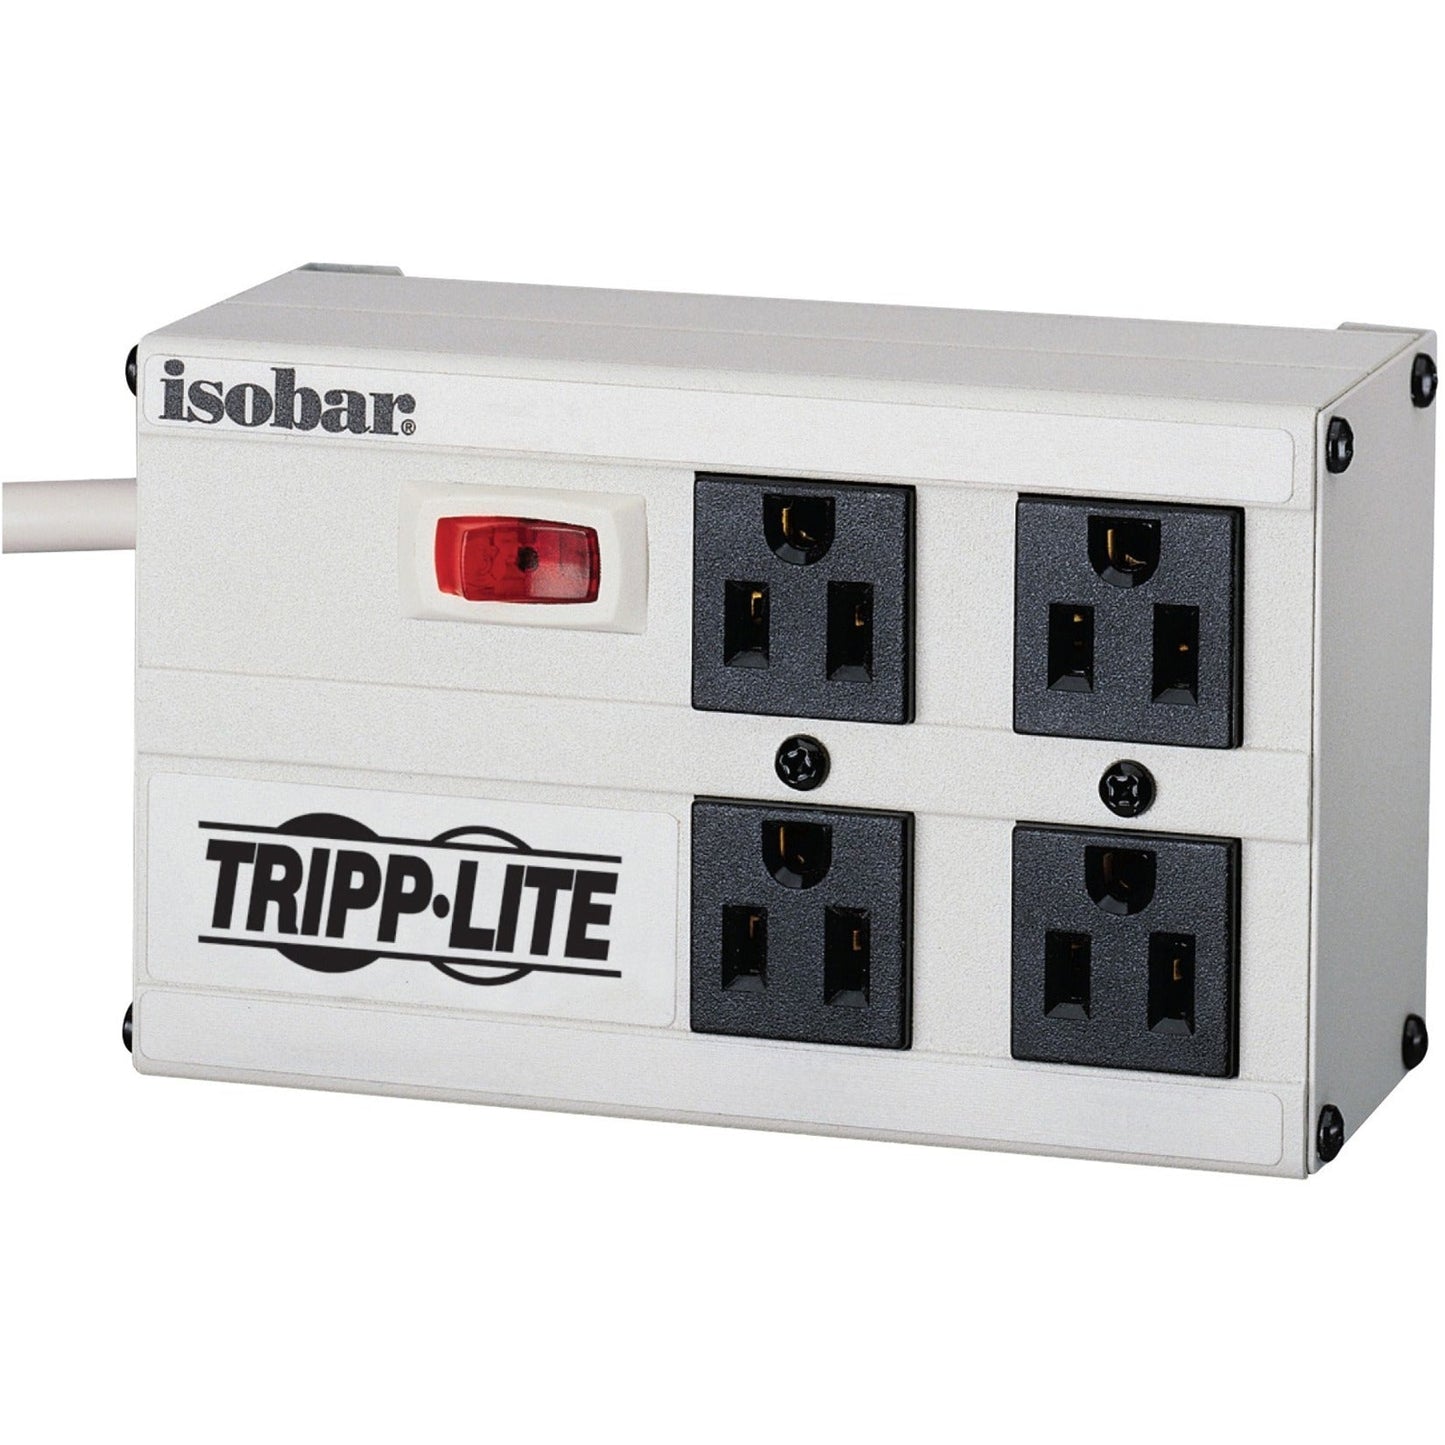 Tripp Lite Isobar 4-Outlet Surge Protector 6 ft. Cord with Right-Angle Plug 3330 Joules Metal Housing